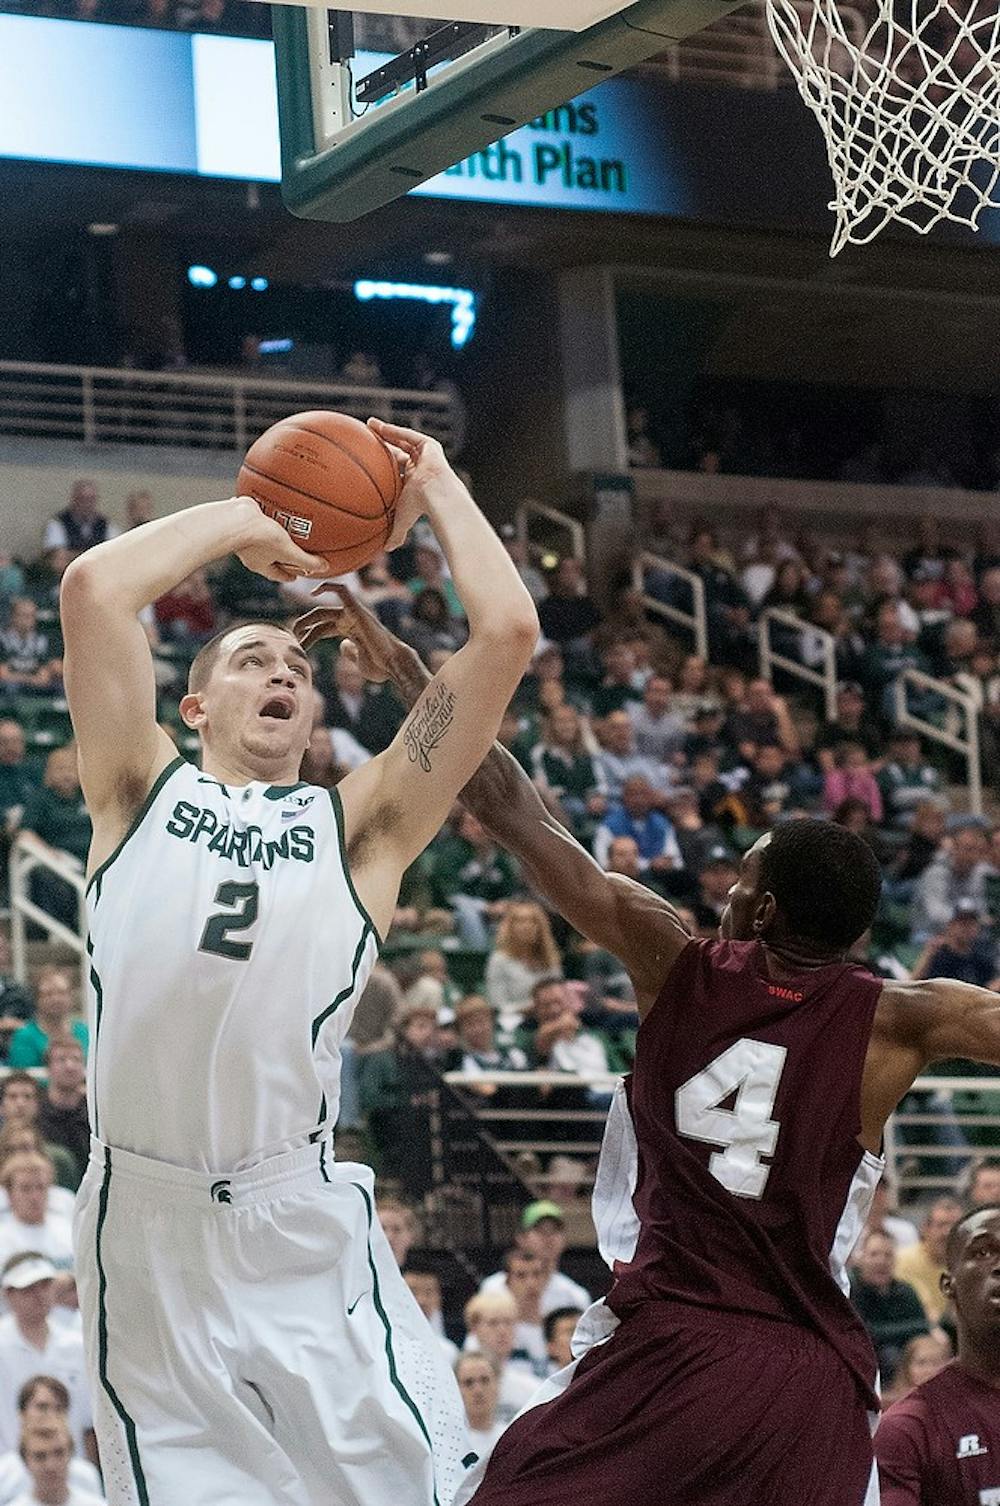 	<p>Sophomore guard Alex Gauna goes to shoot the ball during the game against Texas Southern on Nov. 18, 2012, at Breslin Center. The Spartans beat the Tigers 69-41. Natalie Kolb/The State News</p>